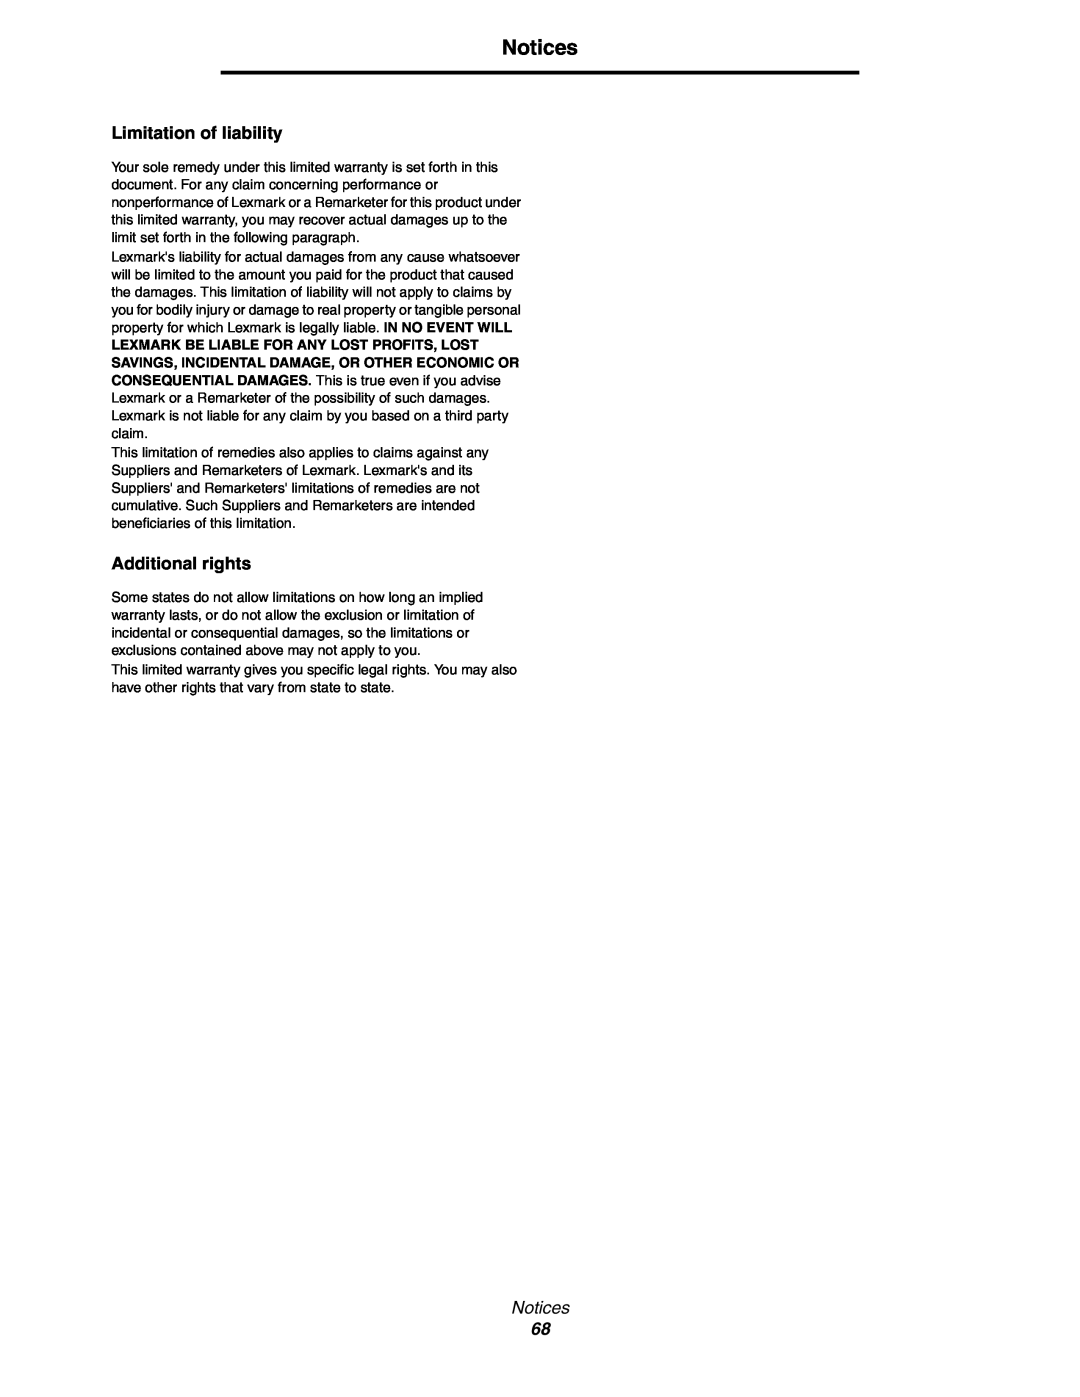 Lexmark 450dn manual Limitation of liability, Additional rights, Notices 